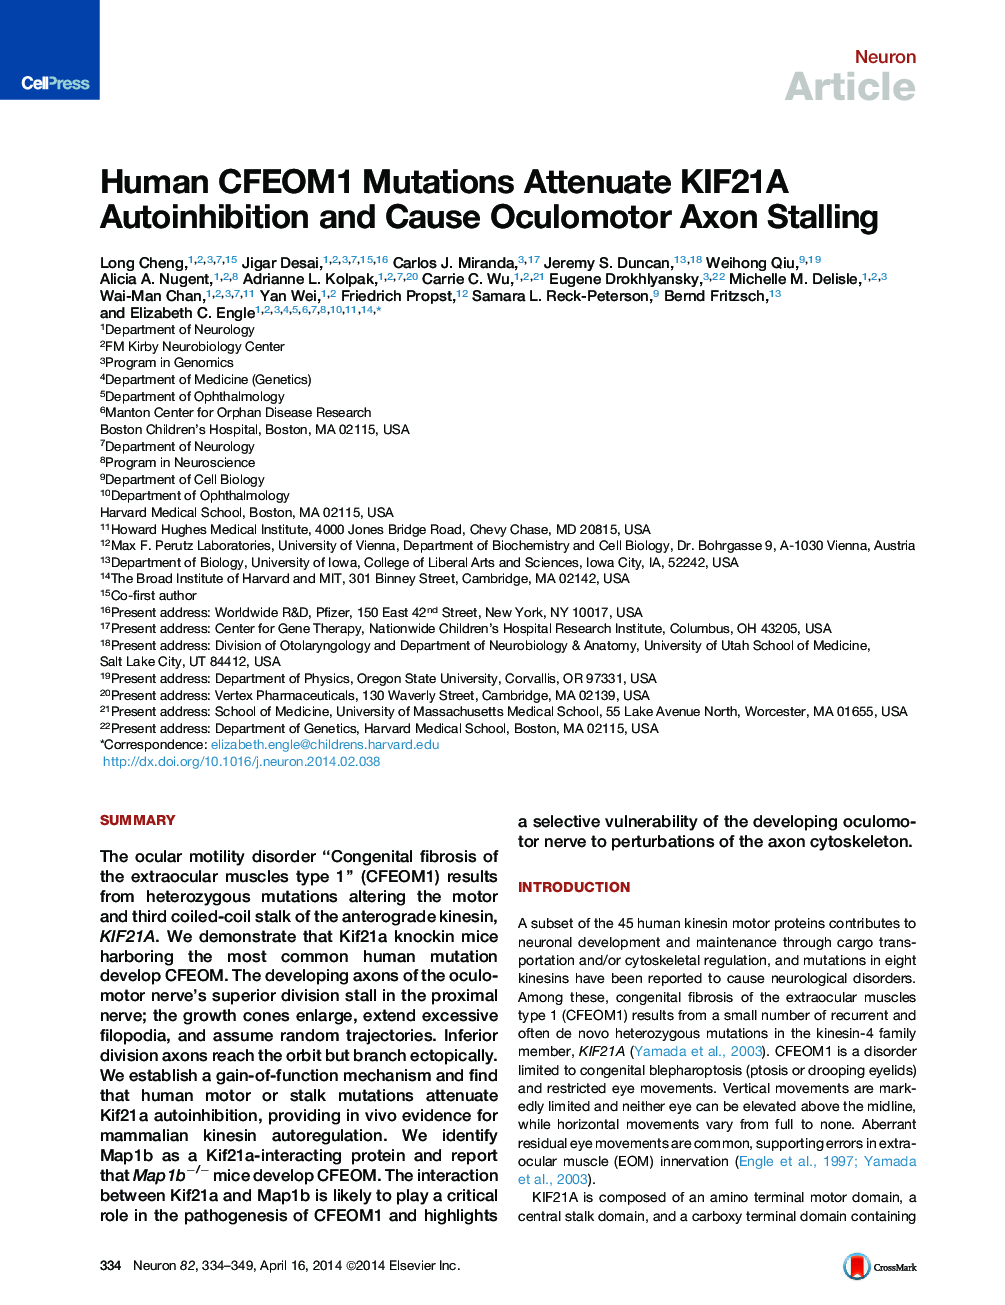 Human CFEOM1 Mutations Attenuate KIF21A Autoinhibition and Cause Oculomotor Axon Stalling